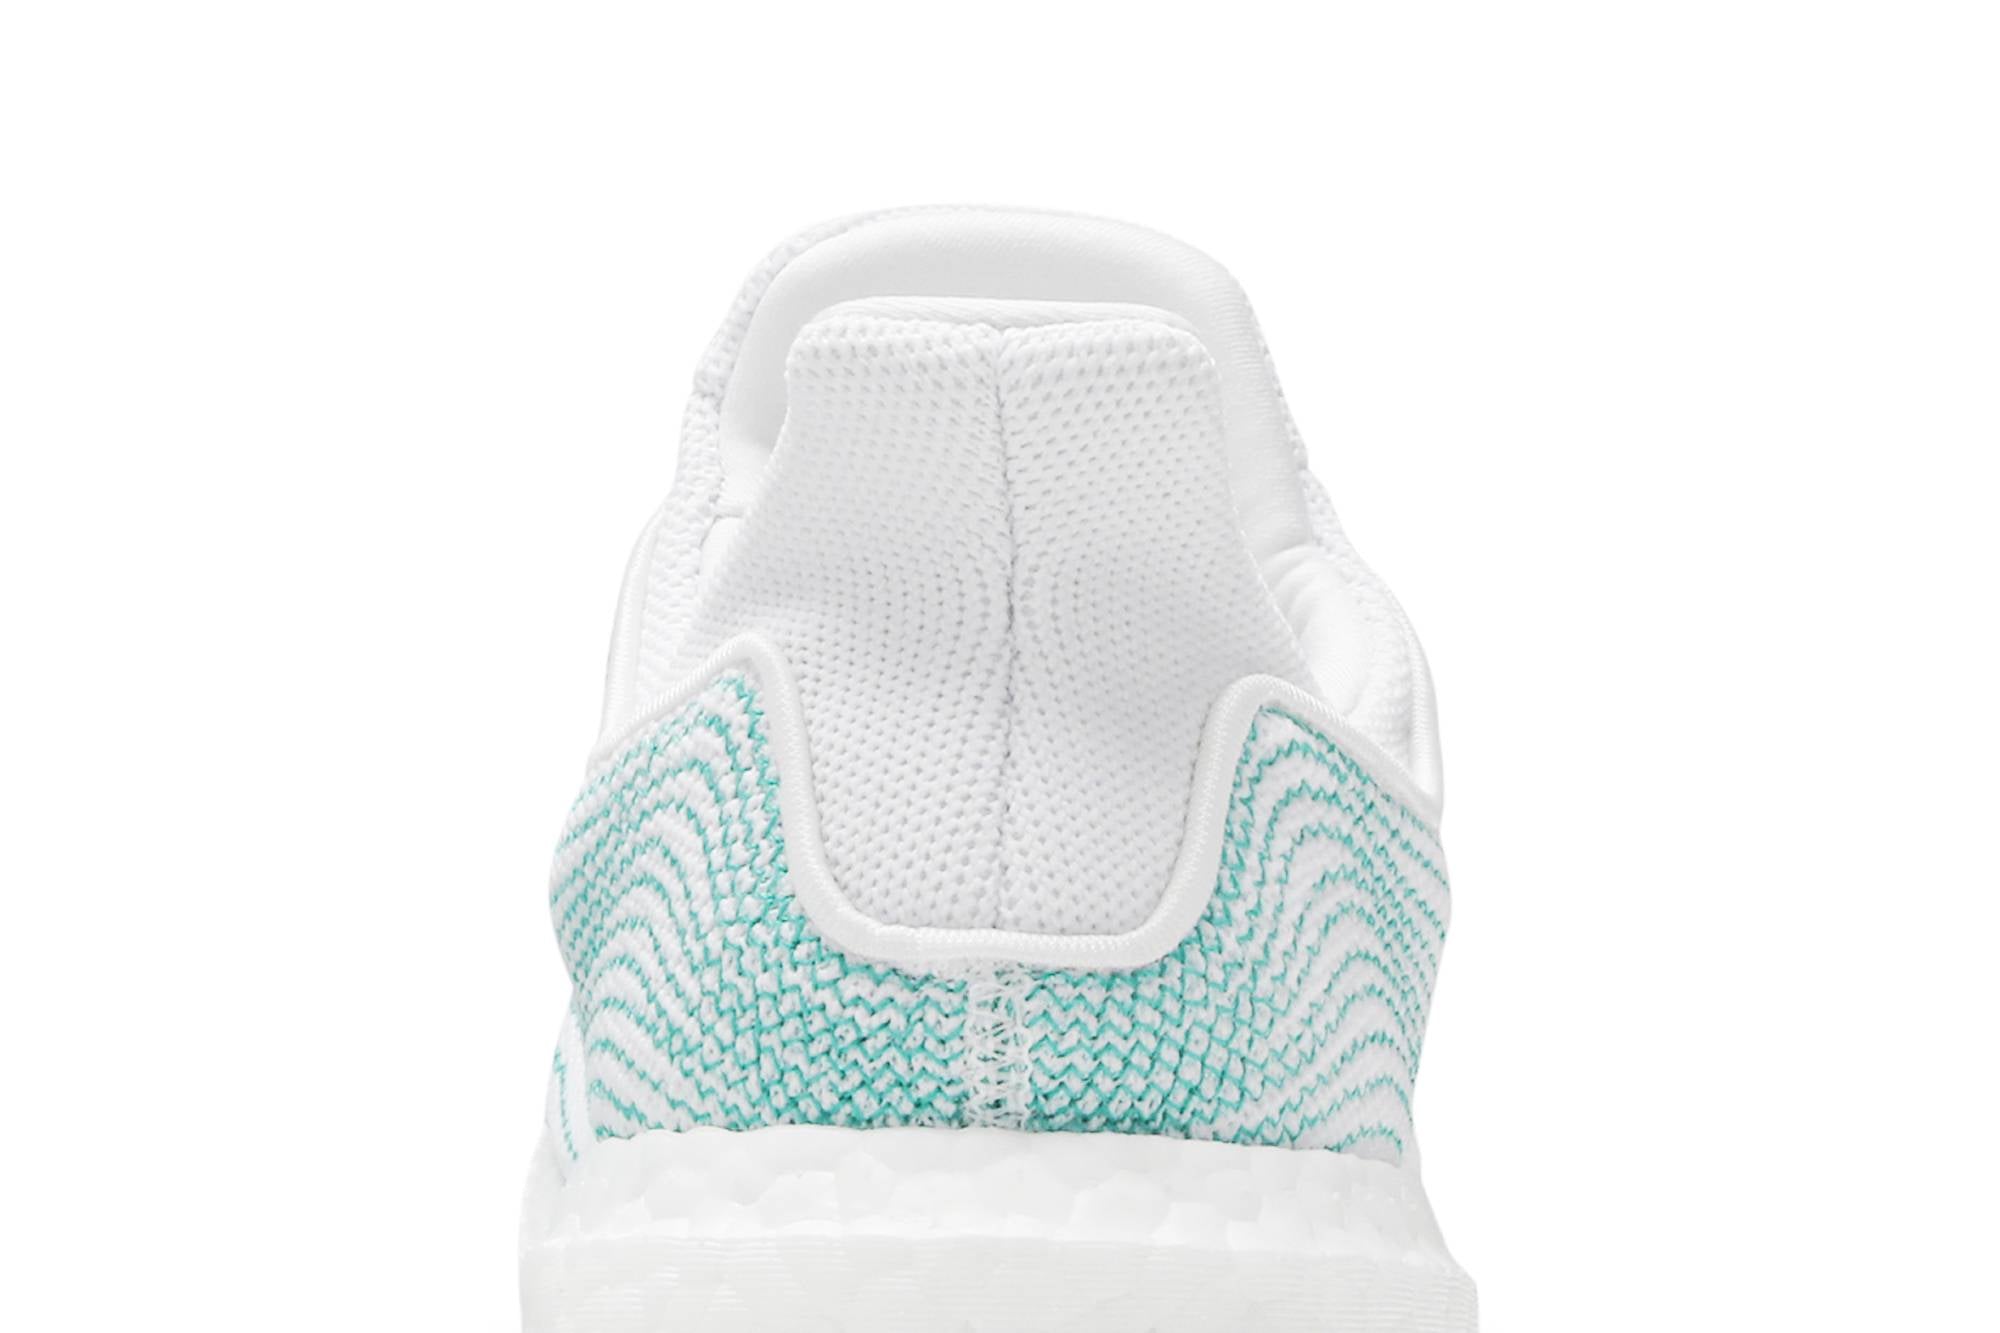 Adidas Parley x UltraBoost DNA - Cloud White ()